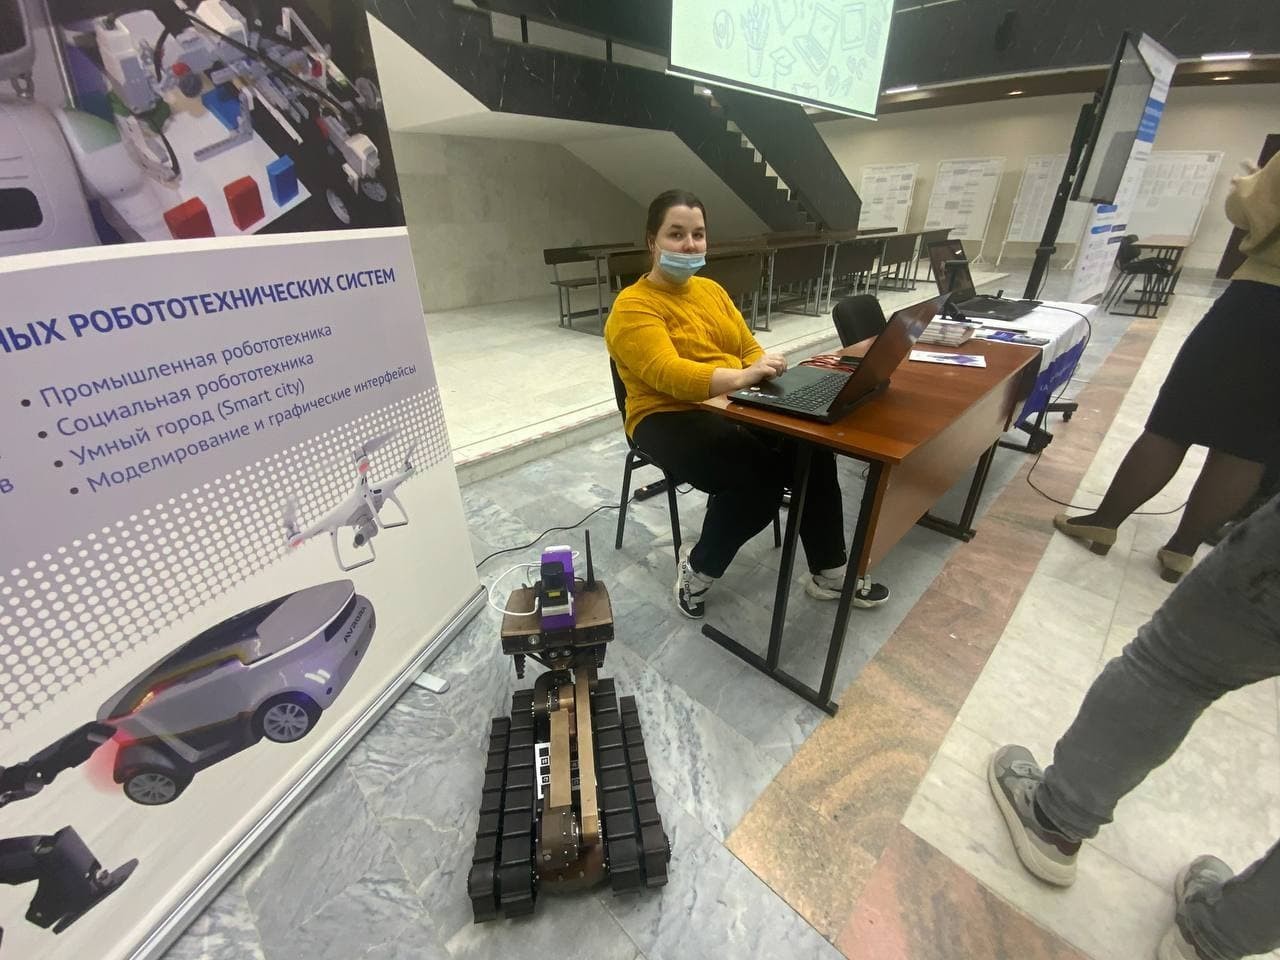 Laboratory of intelligent robotic systems participated in the exhibition dedicated to the VI All-Russian Scientific Conference of Students named after N. Lobachevsky